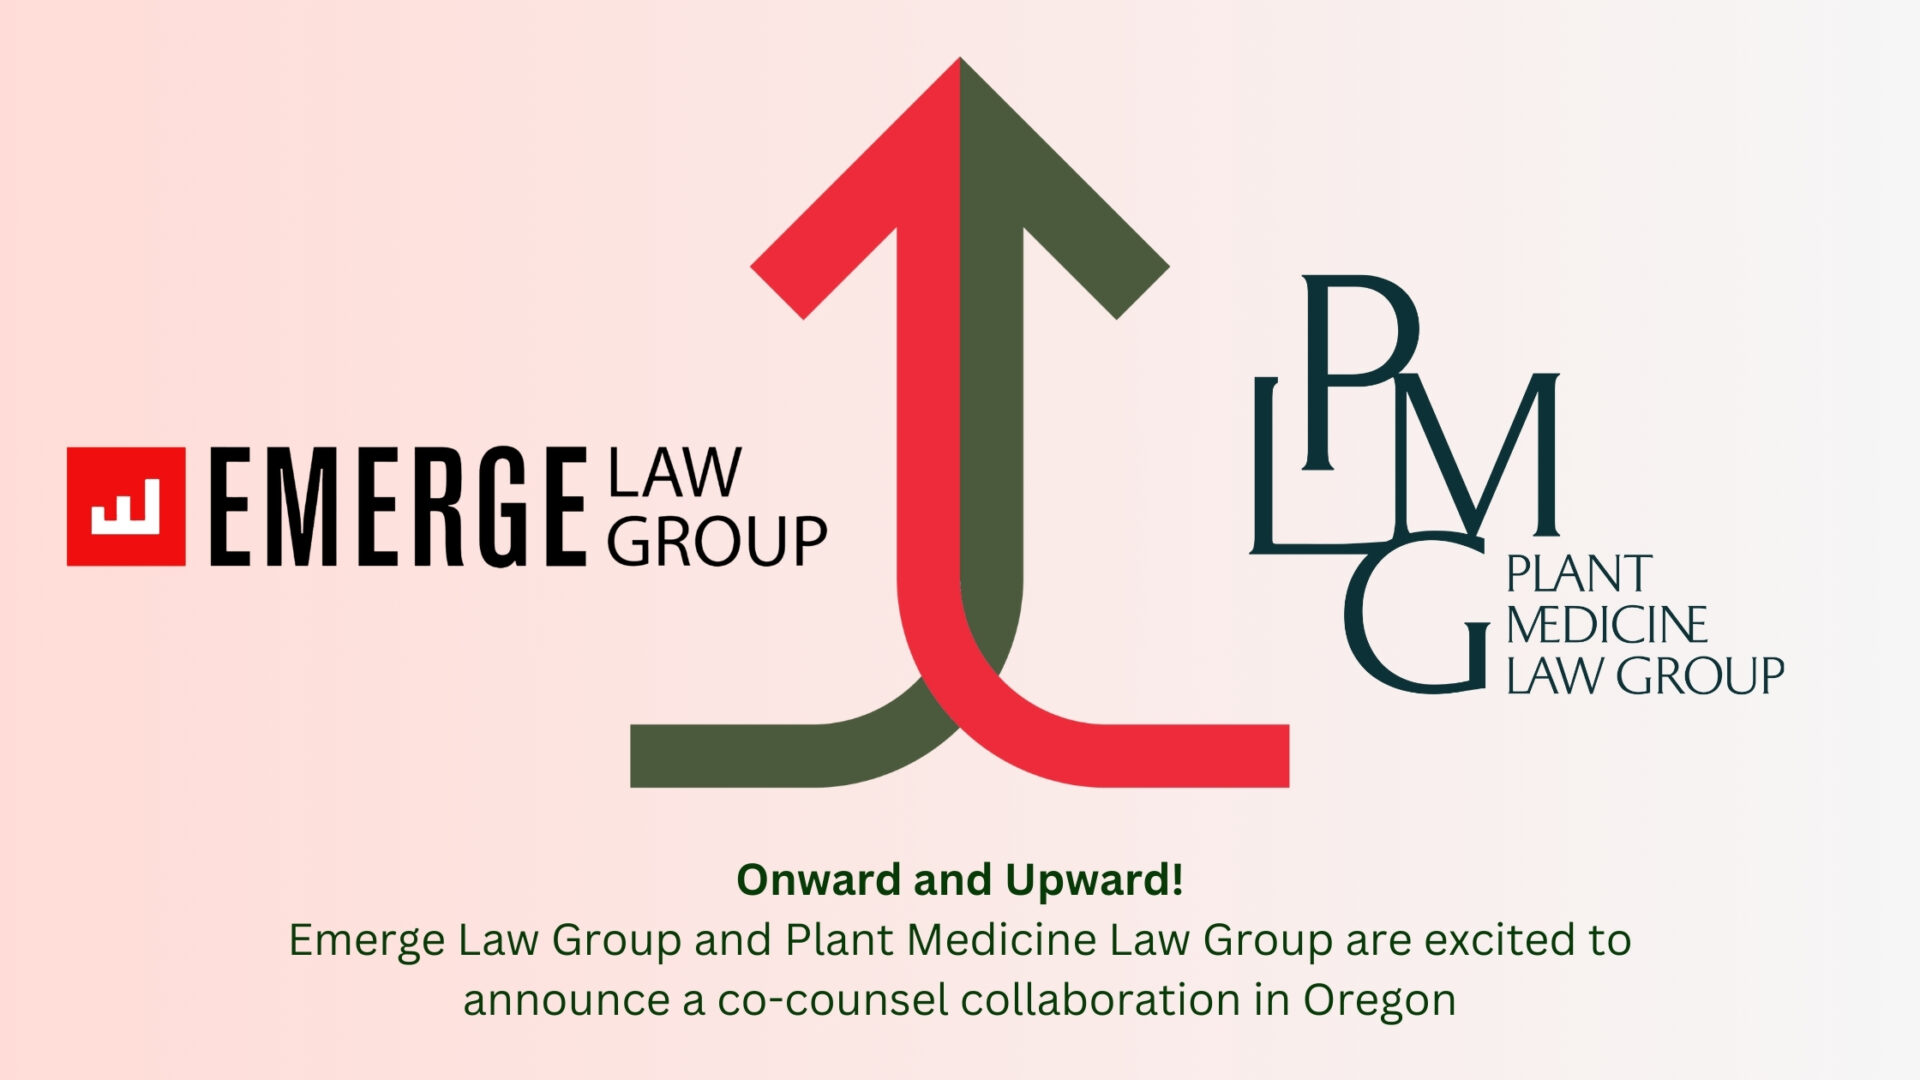 Emerge Law Group and Plant Medicine Law Group are excited to announce a co-counsel collaboration in Oregon!